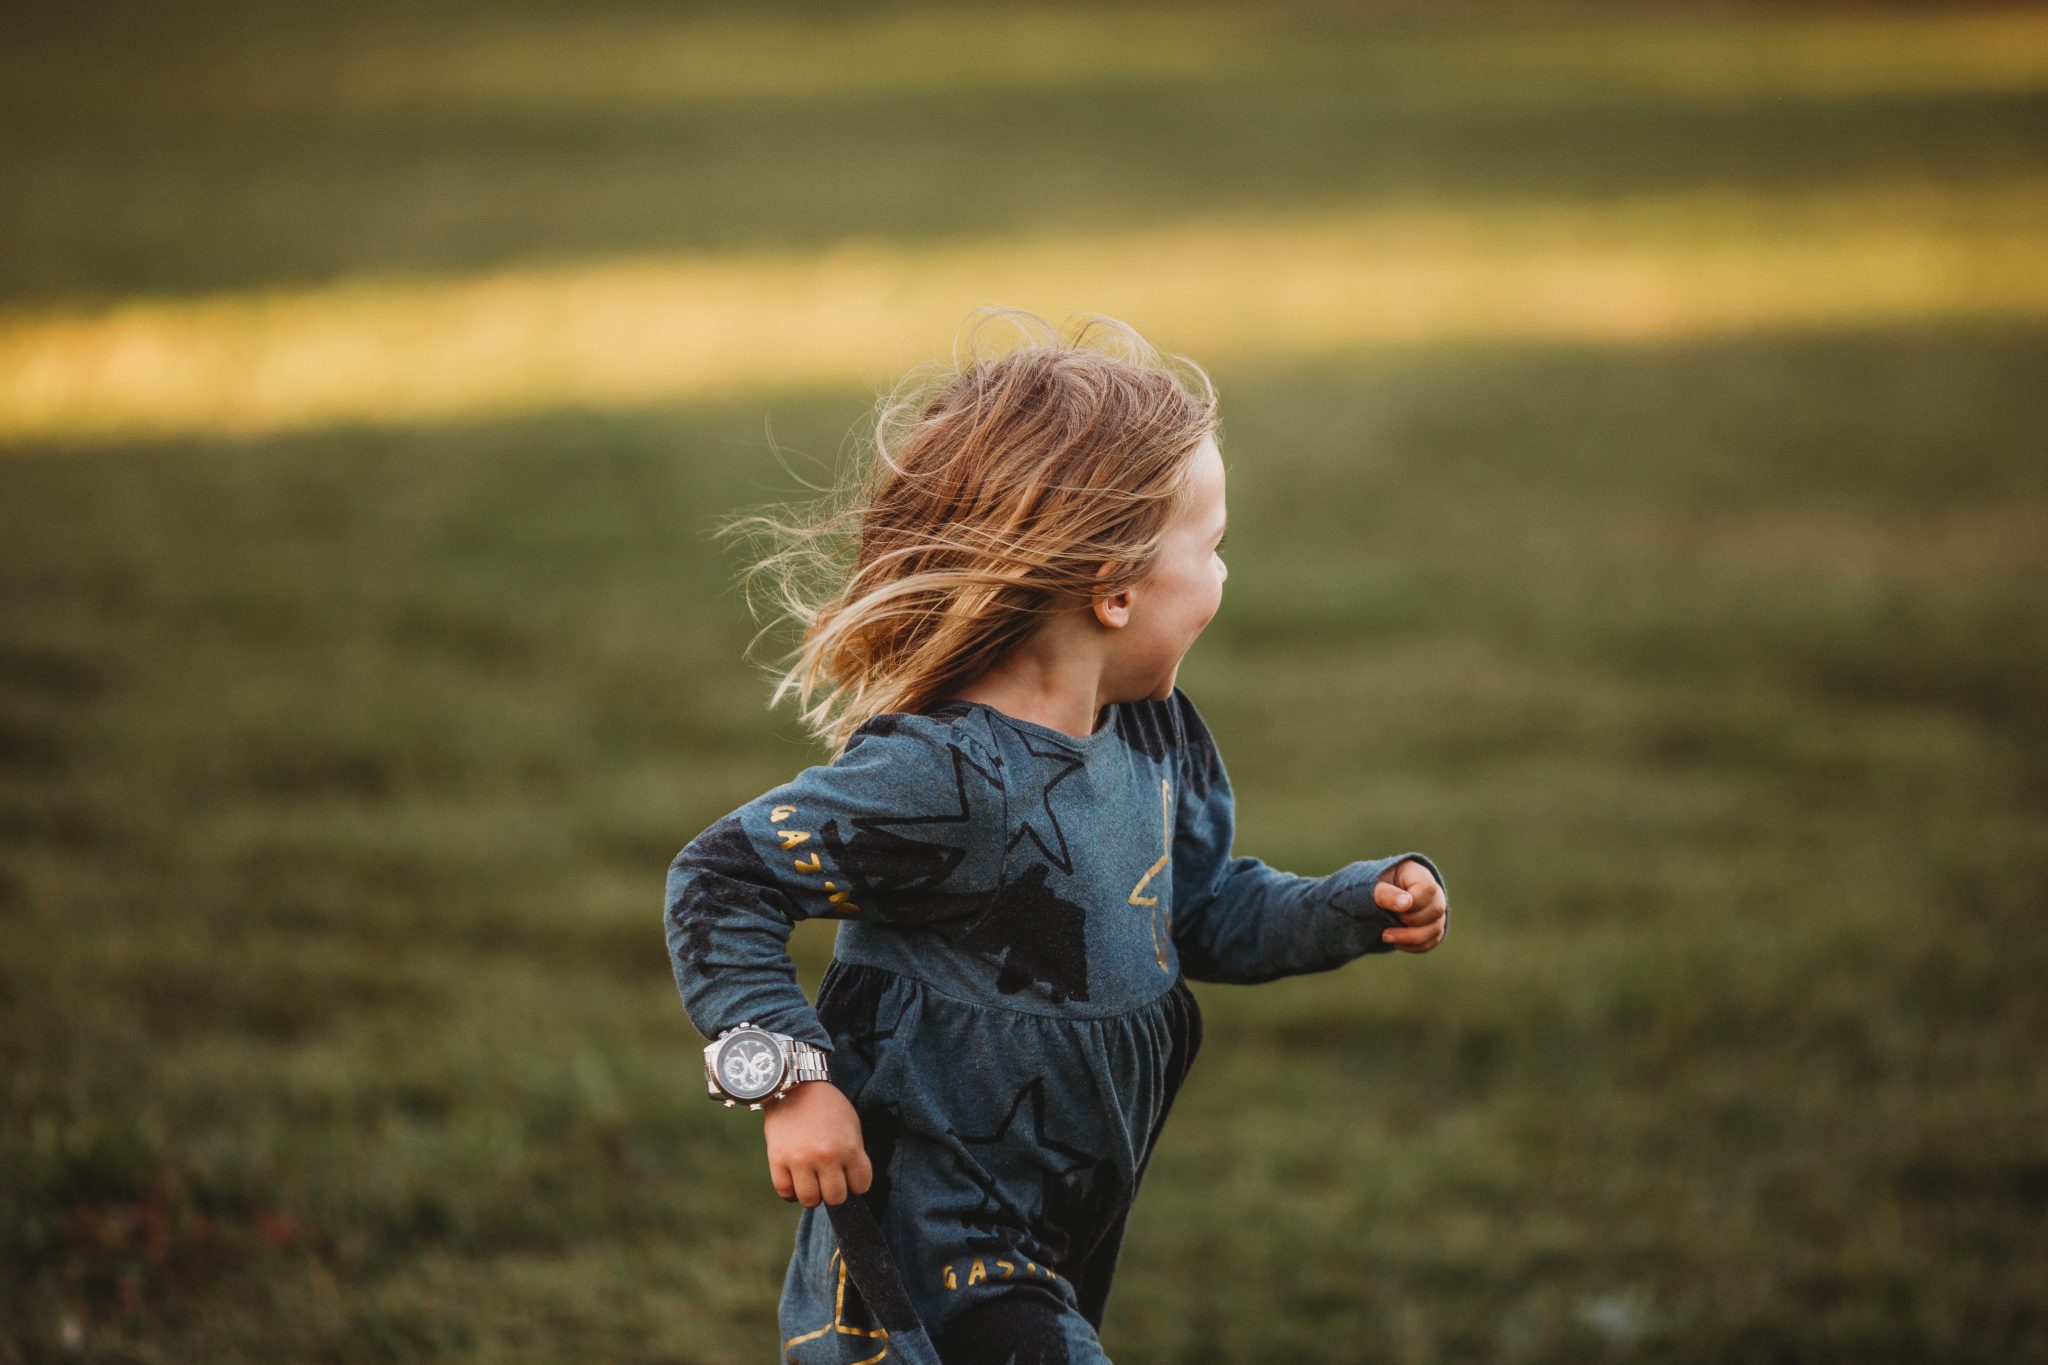 Action shot of young girl running while looking away from camera